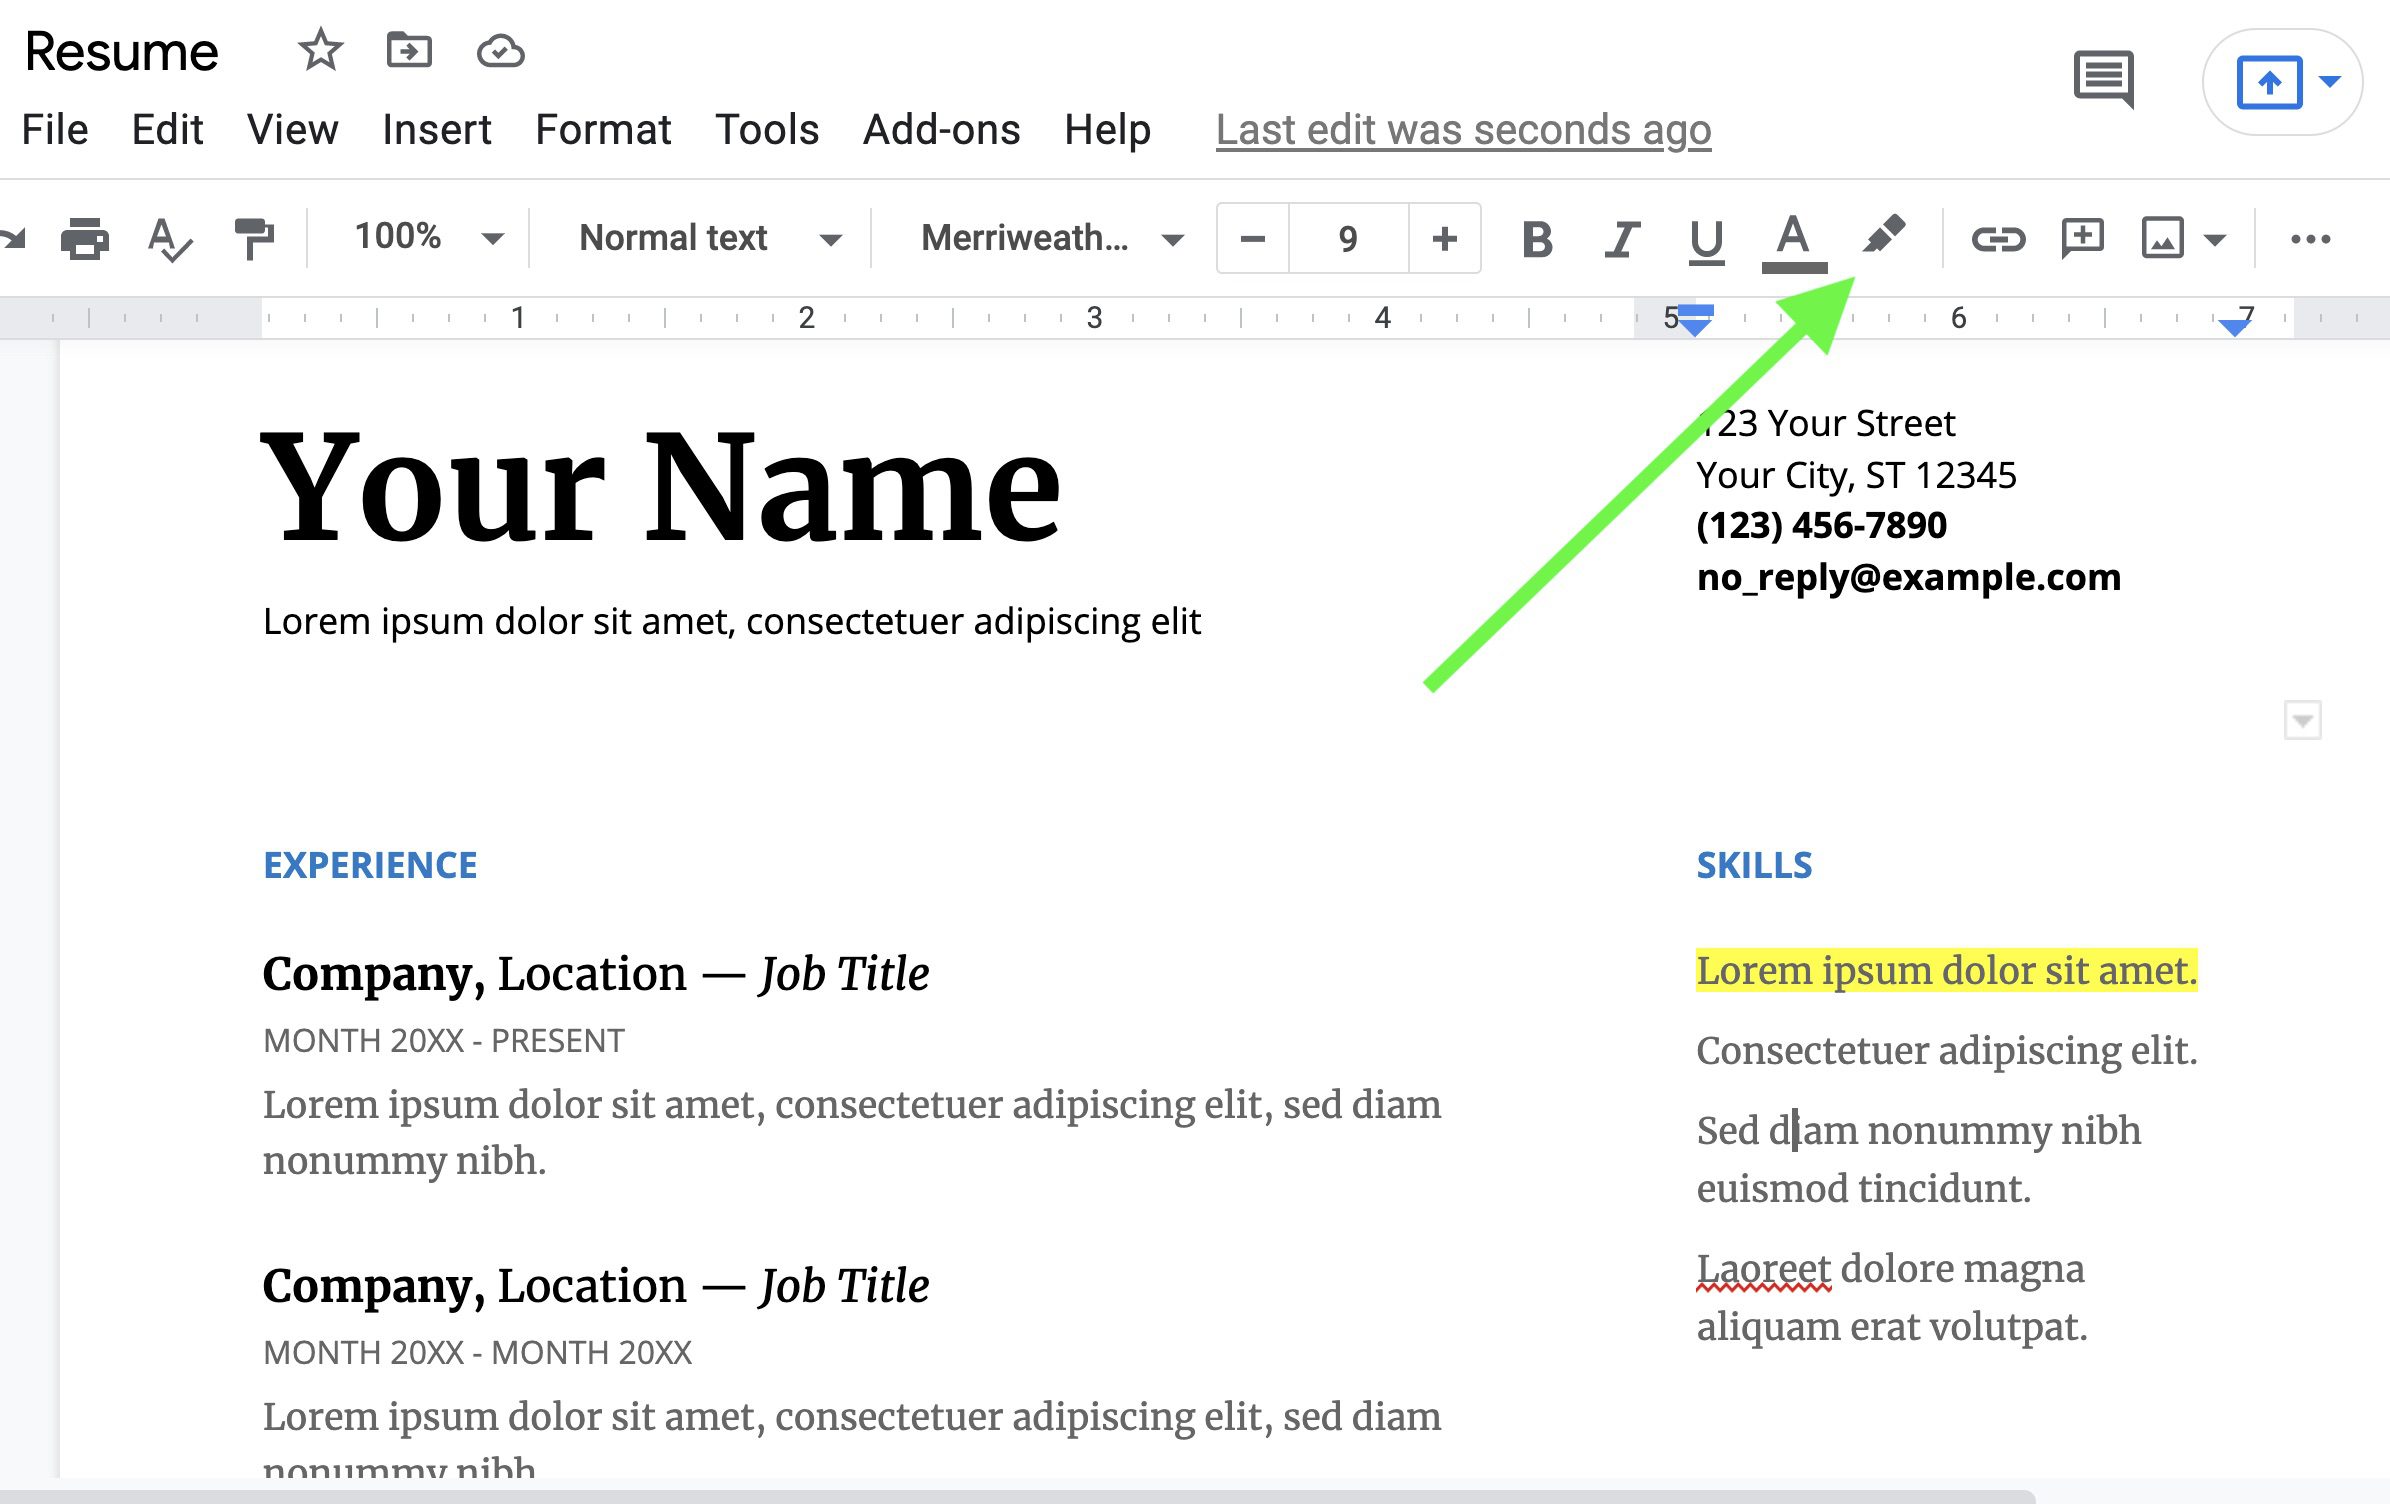 While it used to take several steps including add-ons to highlight in Google Docs, it's now easy using the editor. Simply drag your mouse over the section you wish to highlight. Choose the highlight icon, select a color, and enter/return. 